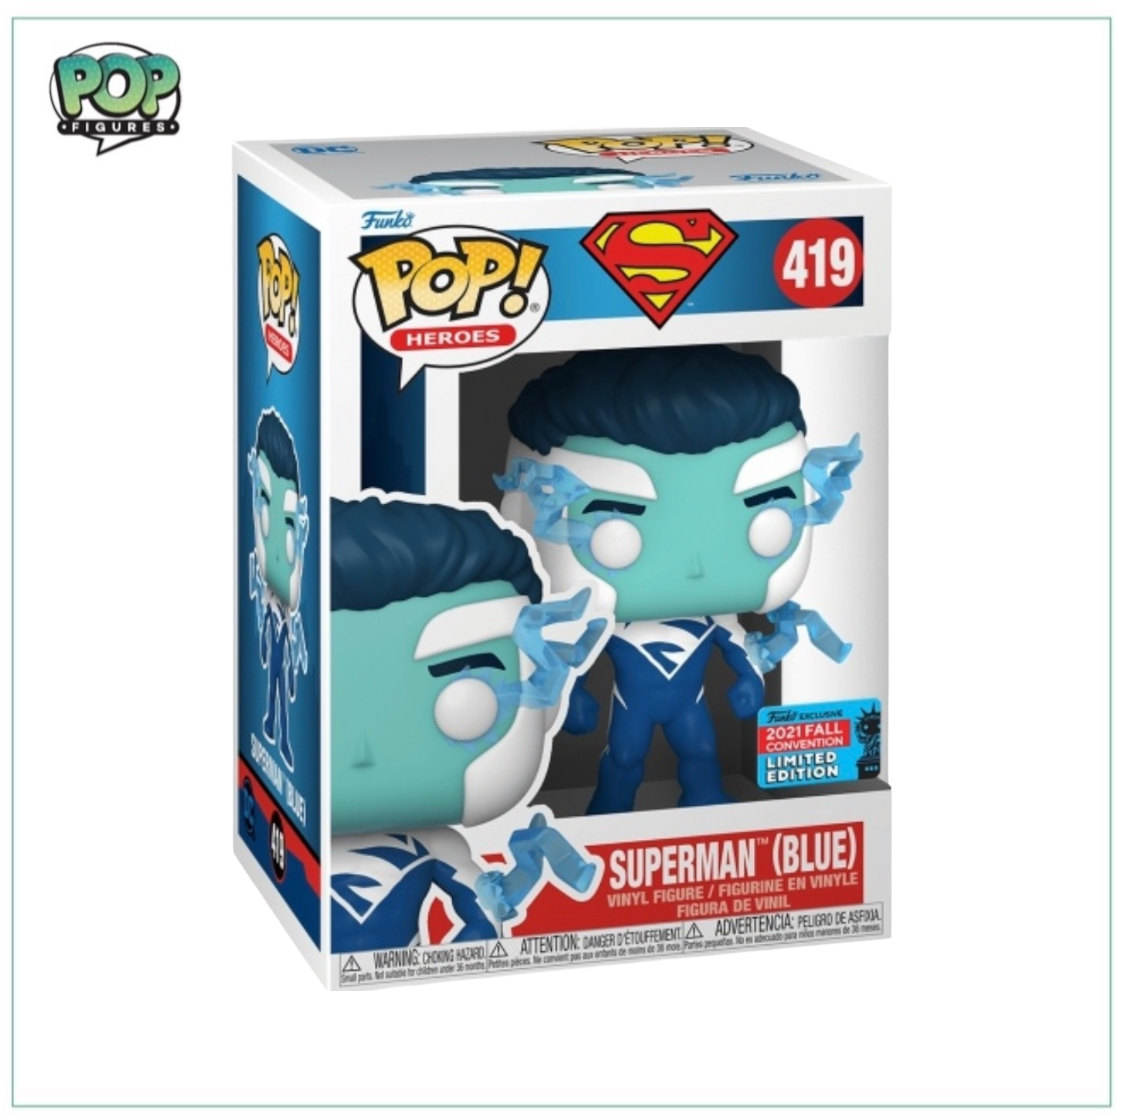 Superman (Blue) #419 Funko Pop! - Superman - NYCC 2021 Shared Exclusive